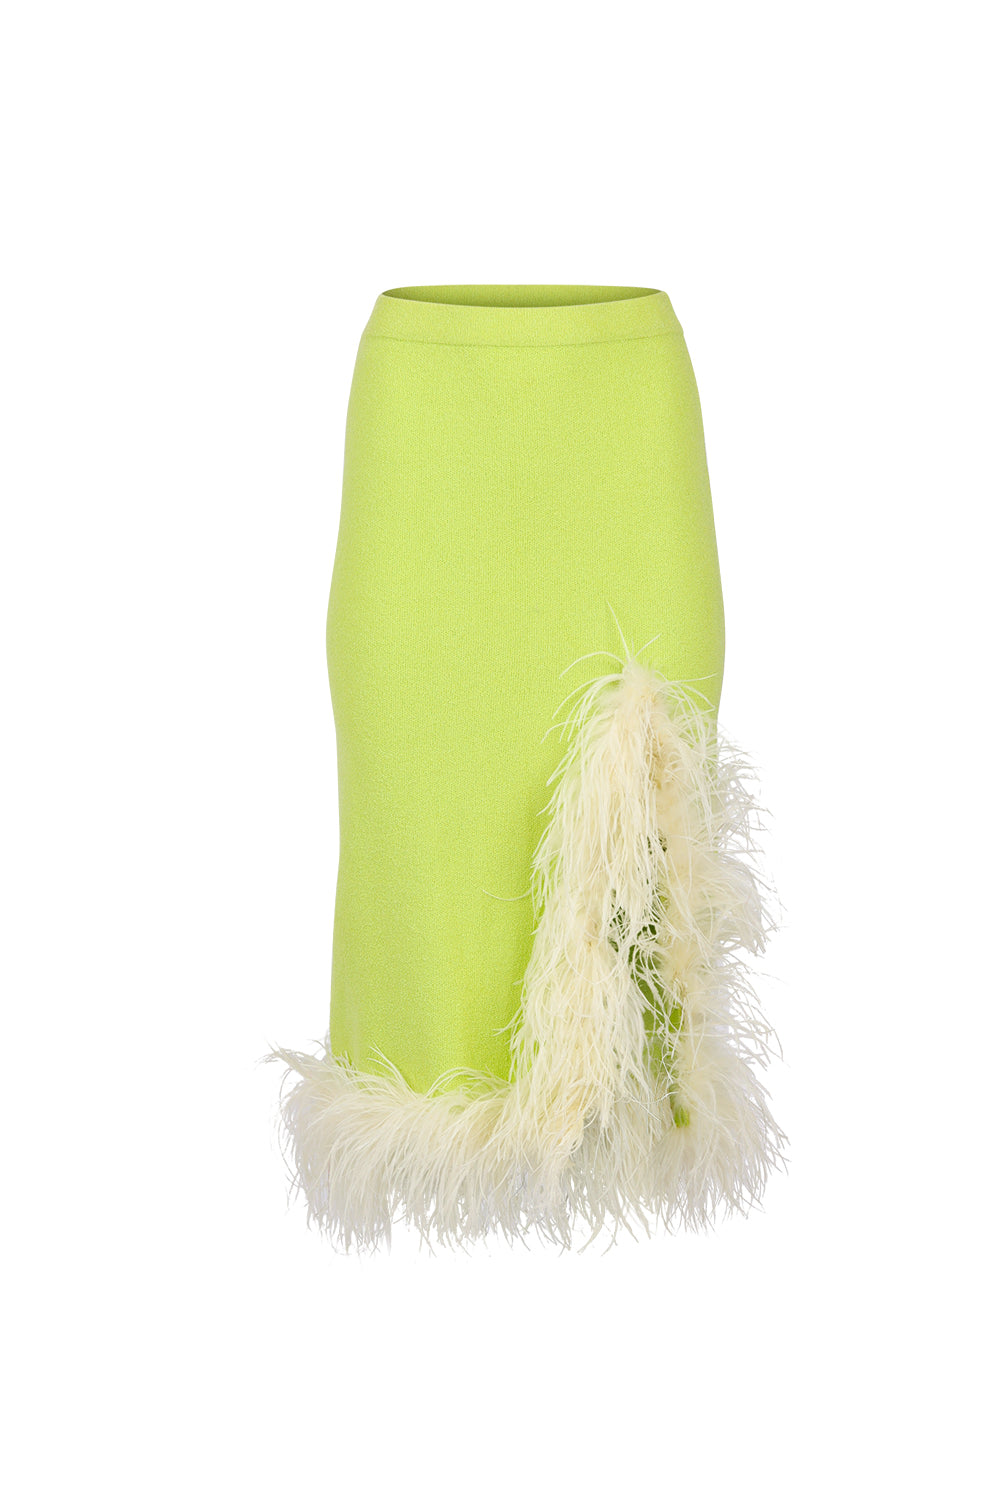 Women’s Green Lime Knit Skirt With Feathers Medium Andreeva